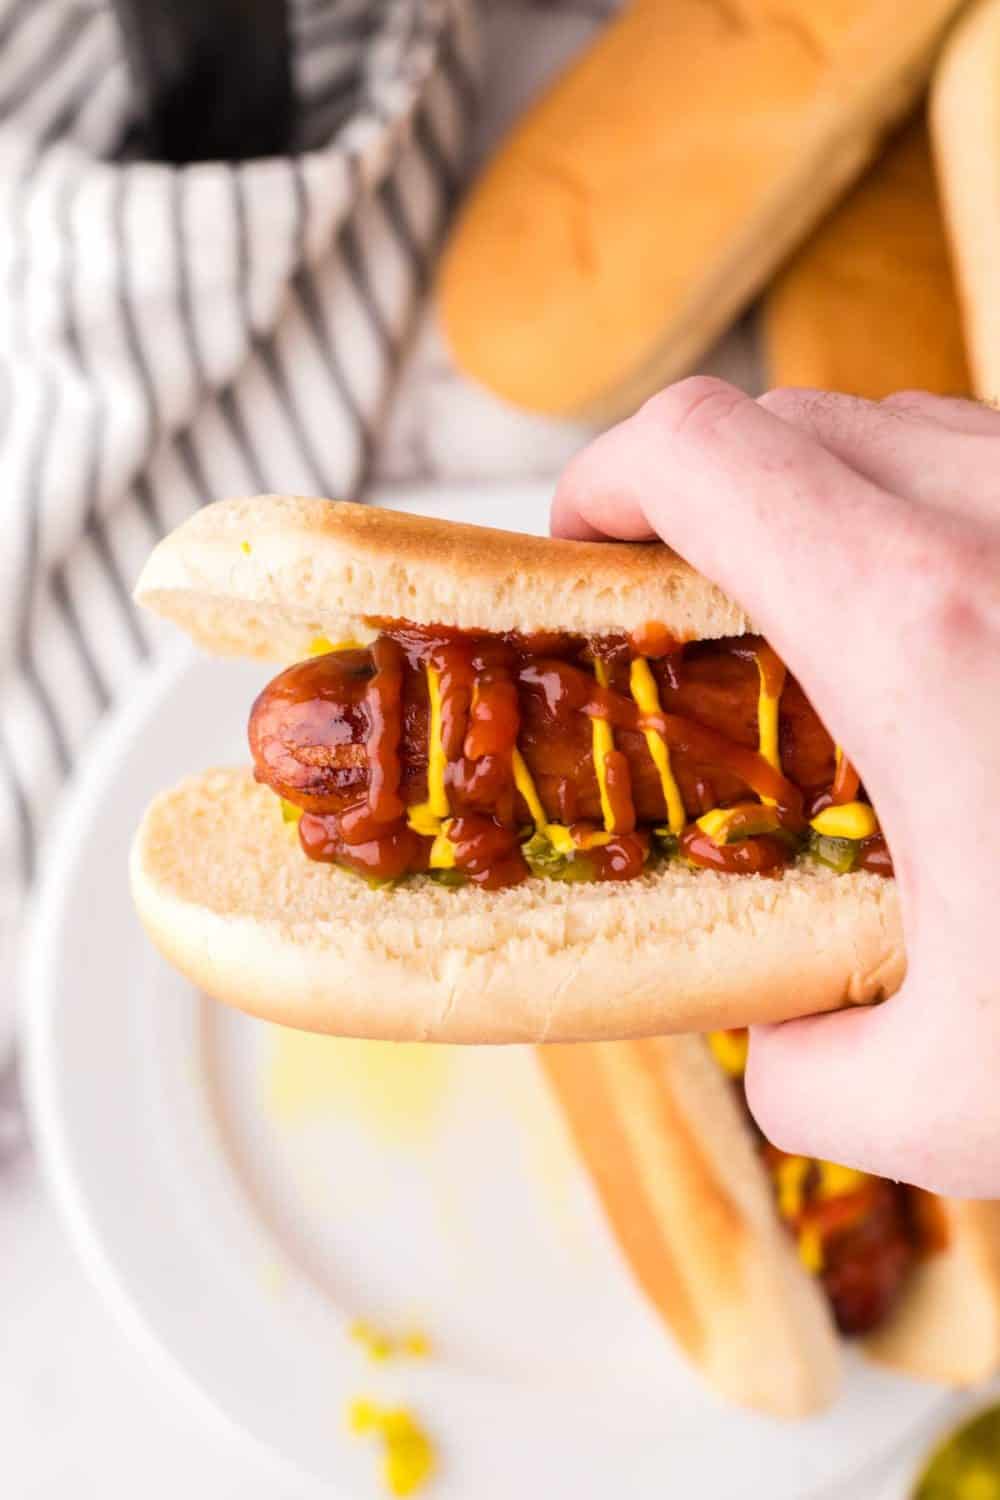 POV hand holding a brats with ketchup mustard and relish in a traditional bun